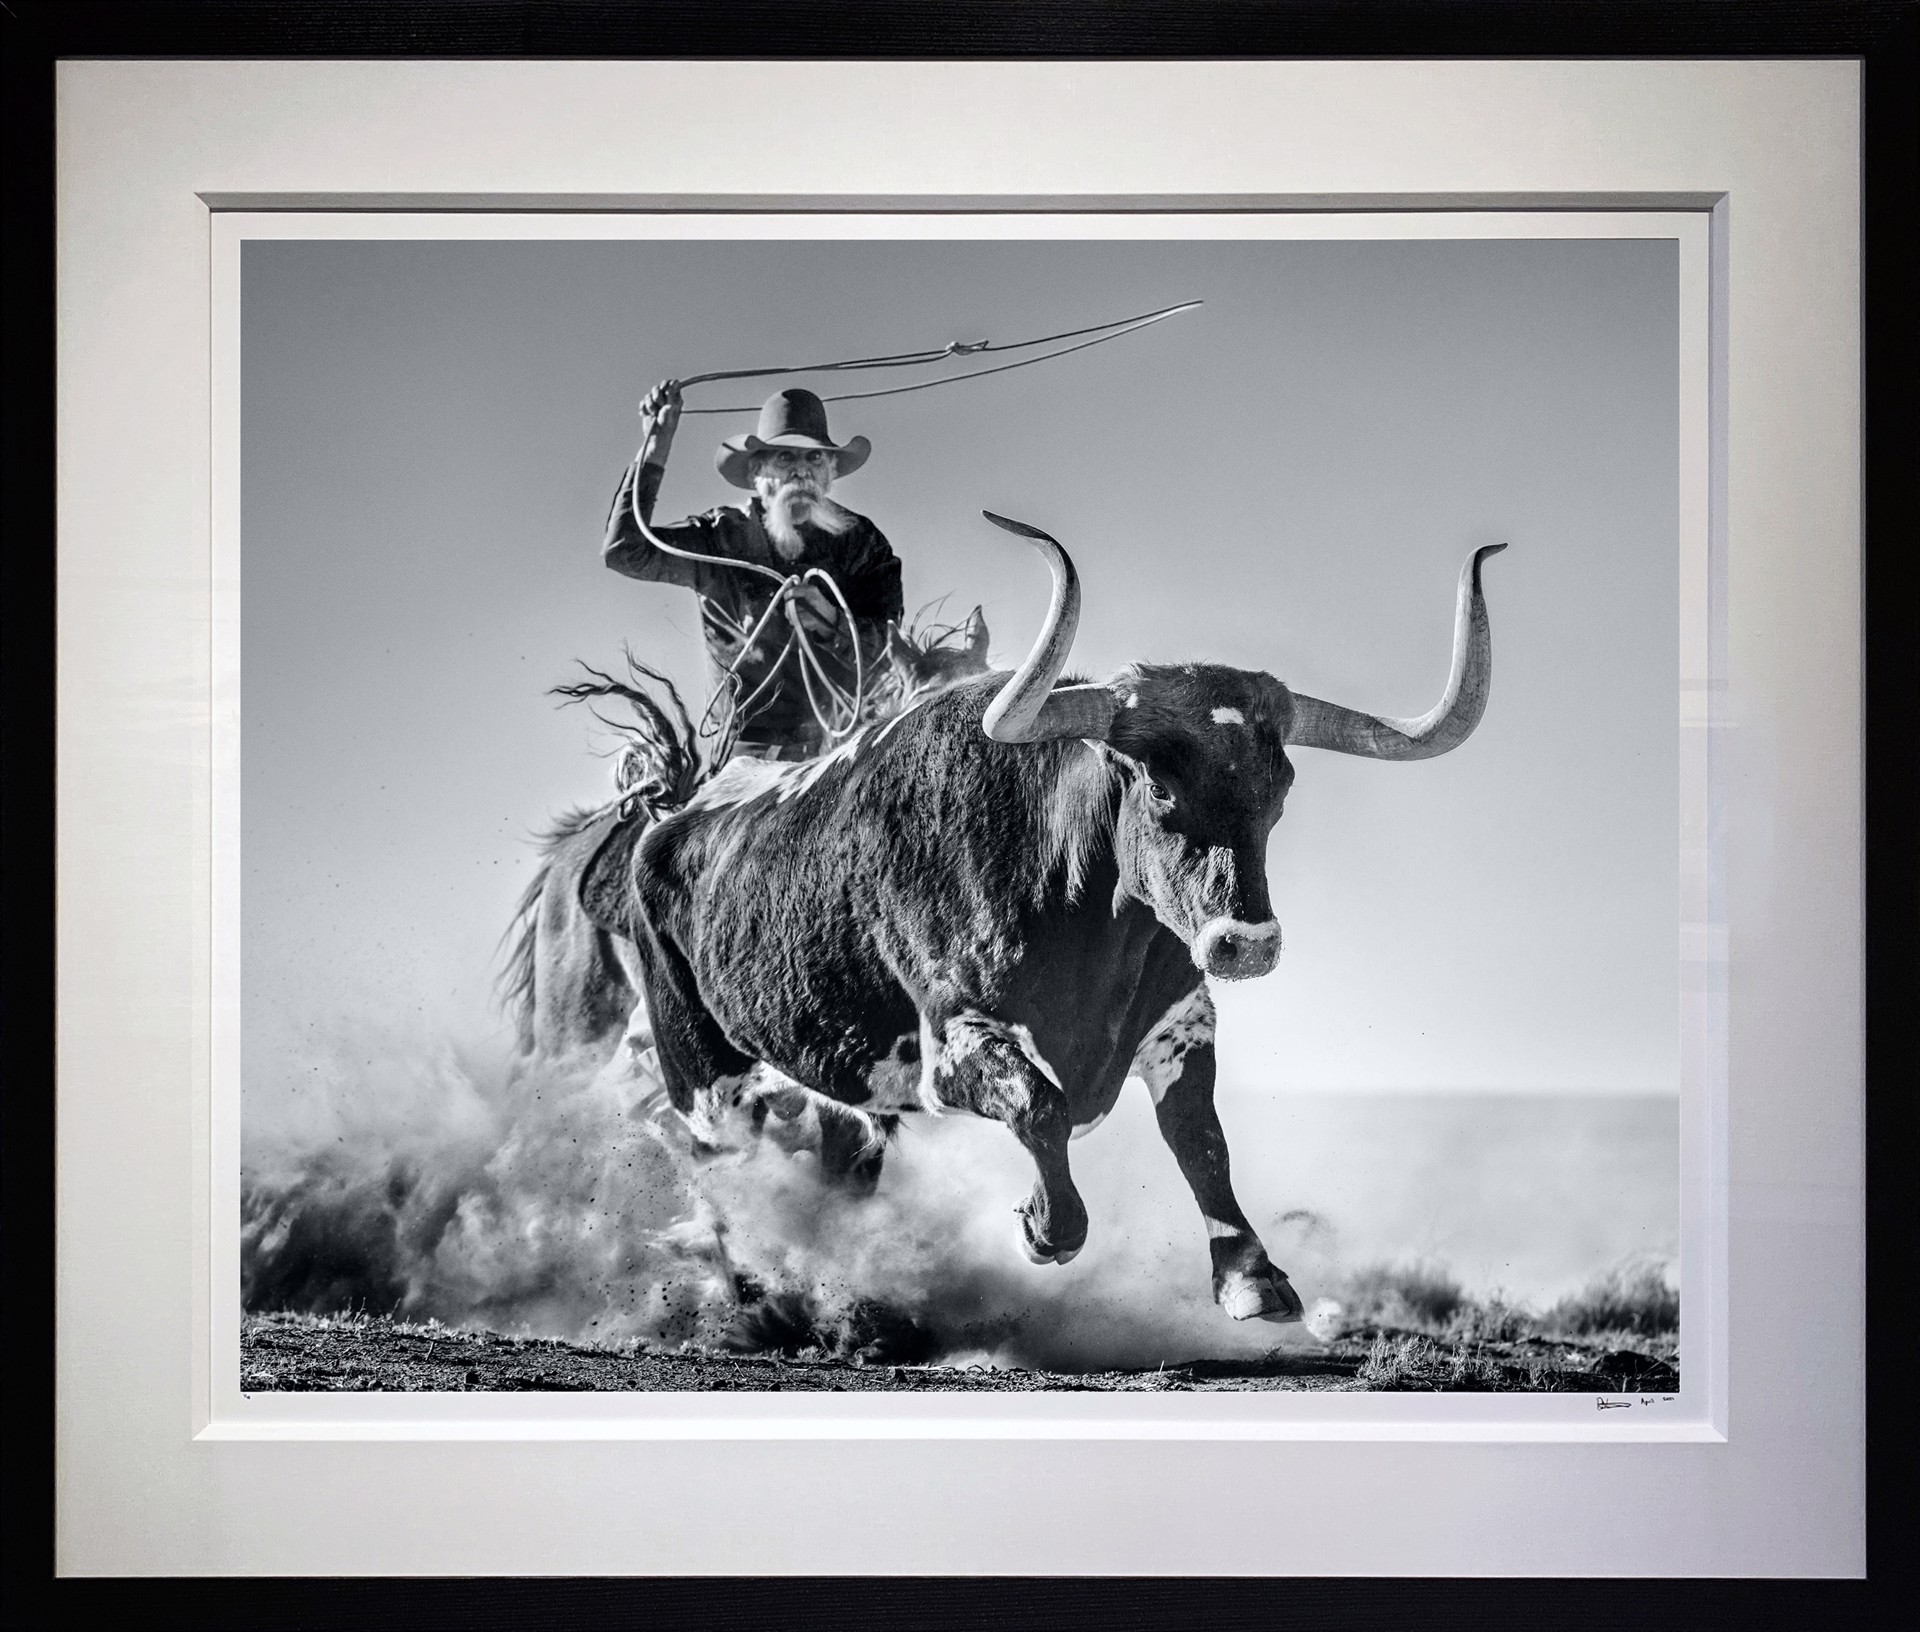 Ain't My First Rodeo by David Yarrow